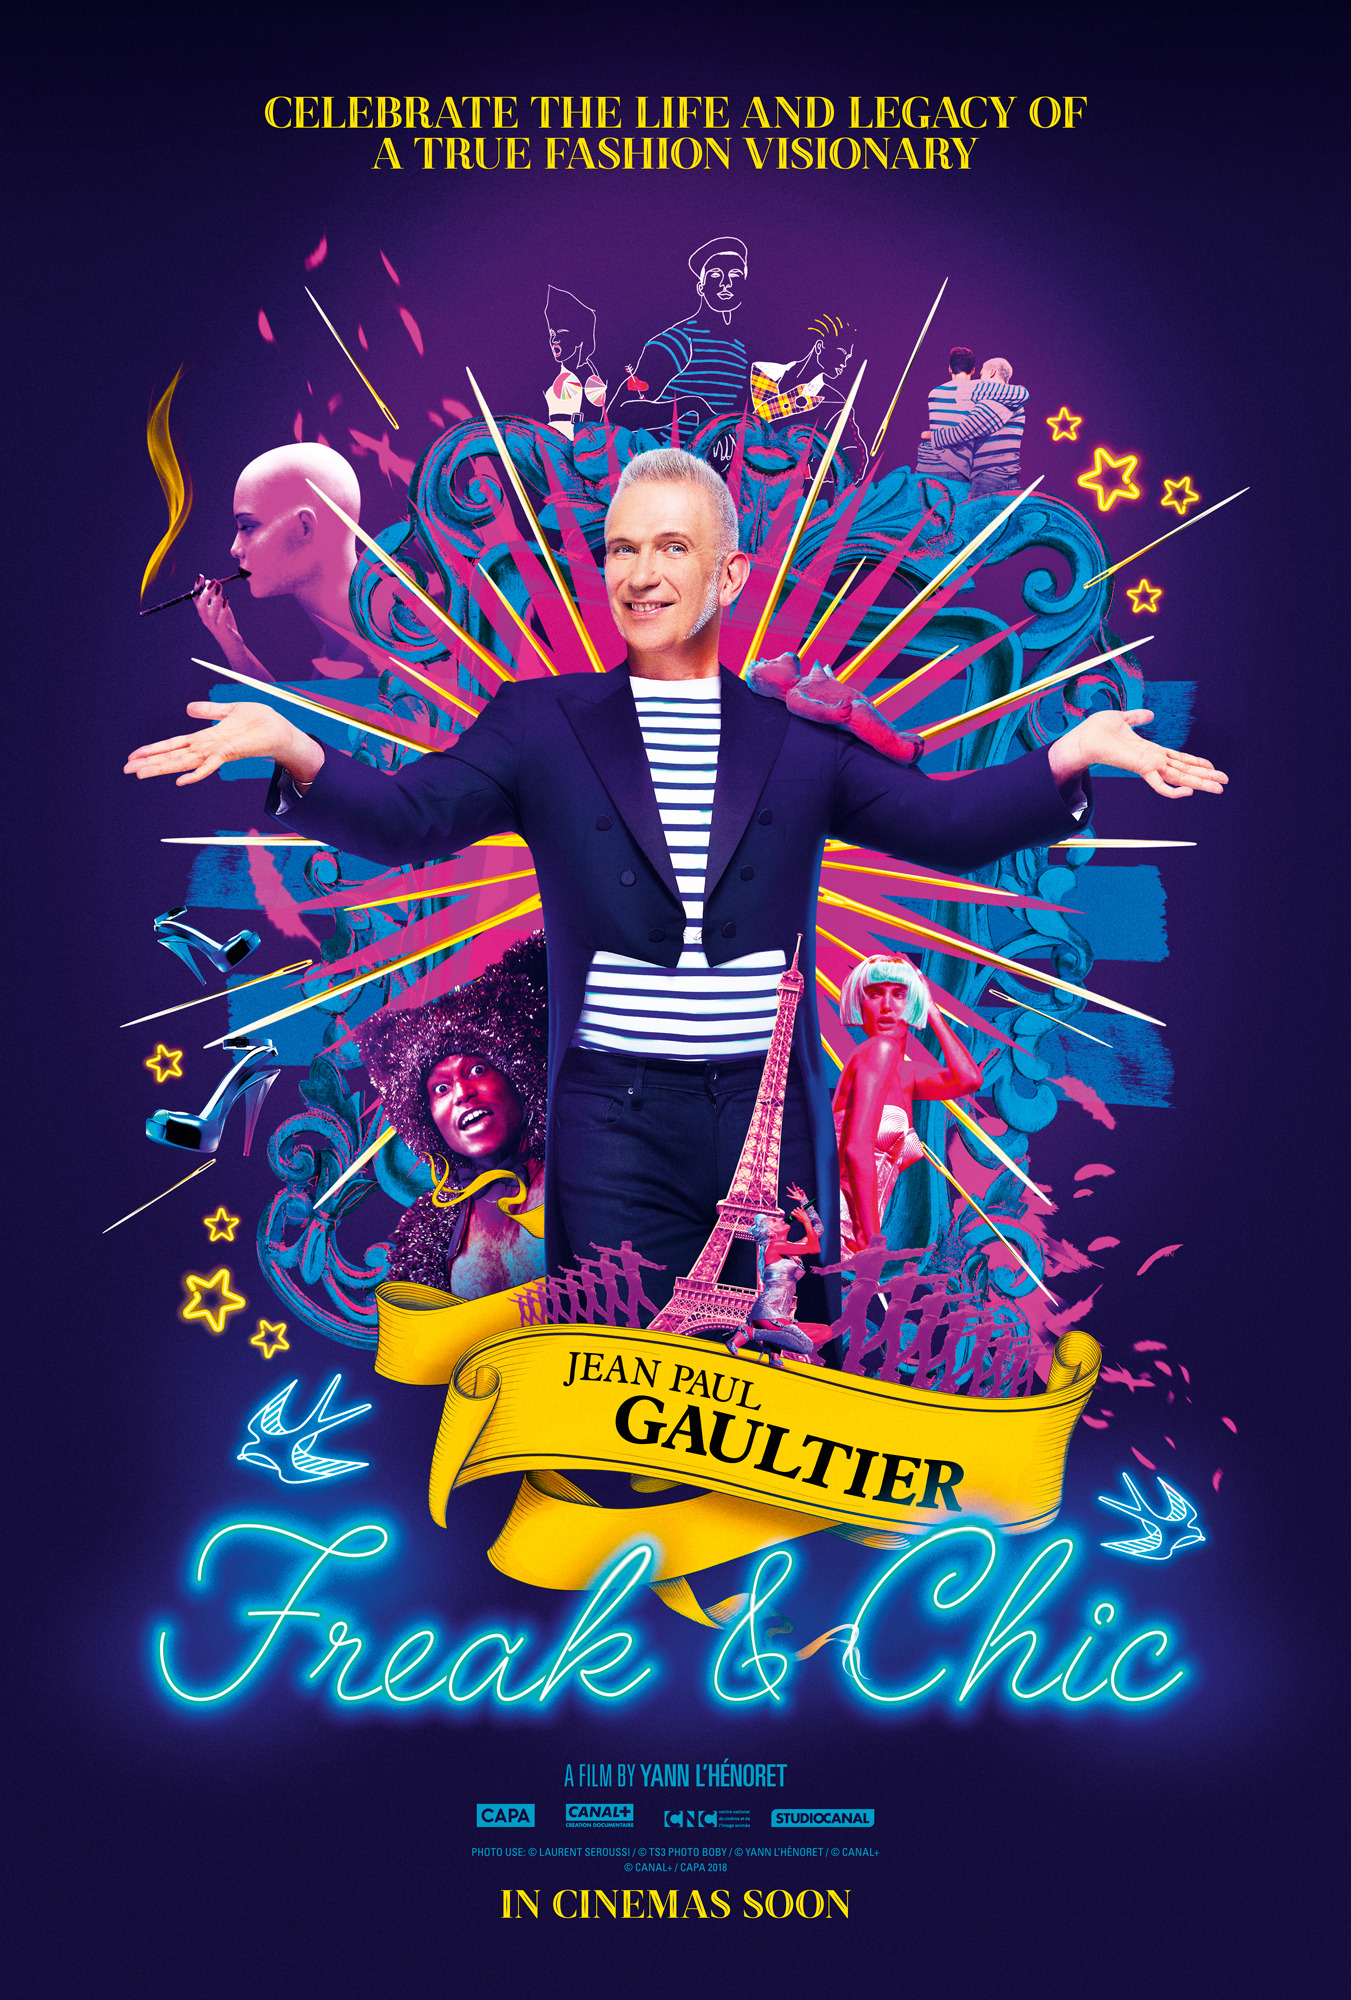 Mega Sized Movie Poster Image for Jean-Paul Gaultier: Freak And Chic 